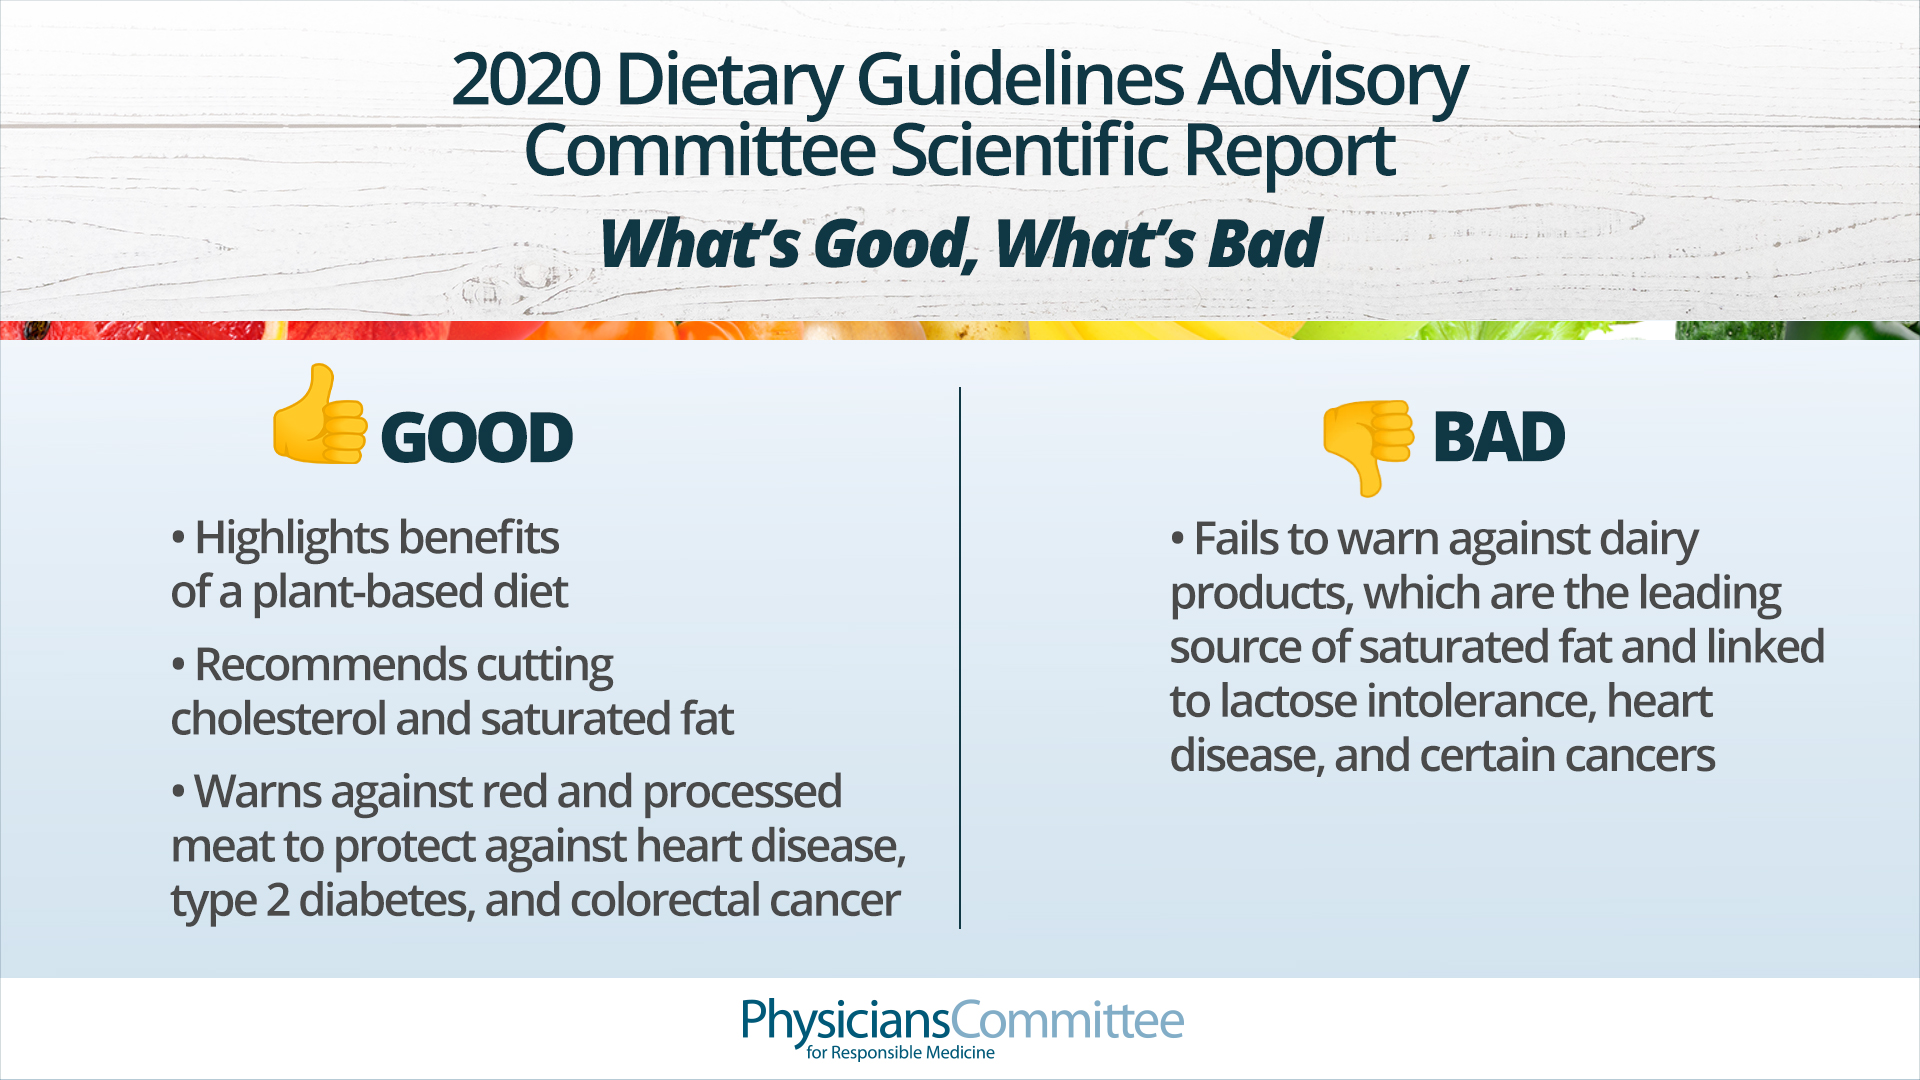 Dietary Guidelines Report Right on Eating Plant-Based Diet, Avoiding Saturated Fat, Meat, Cholesterol